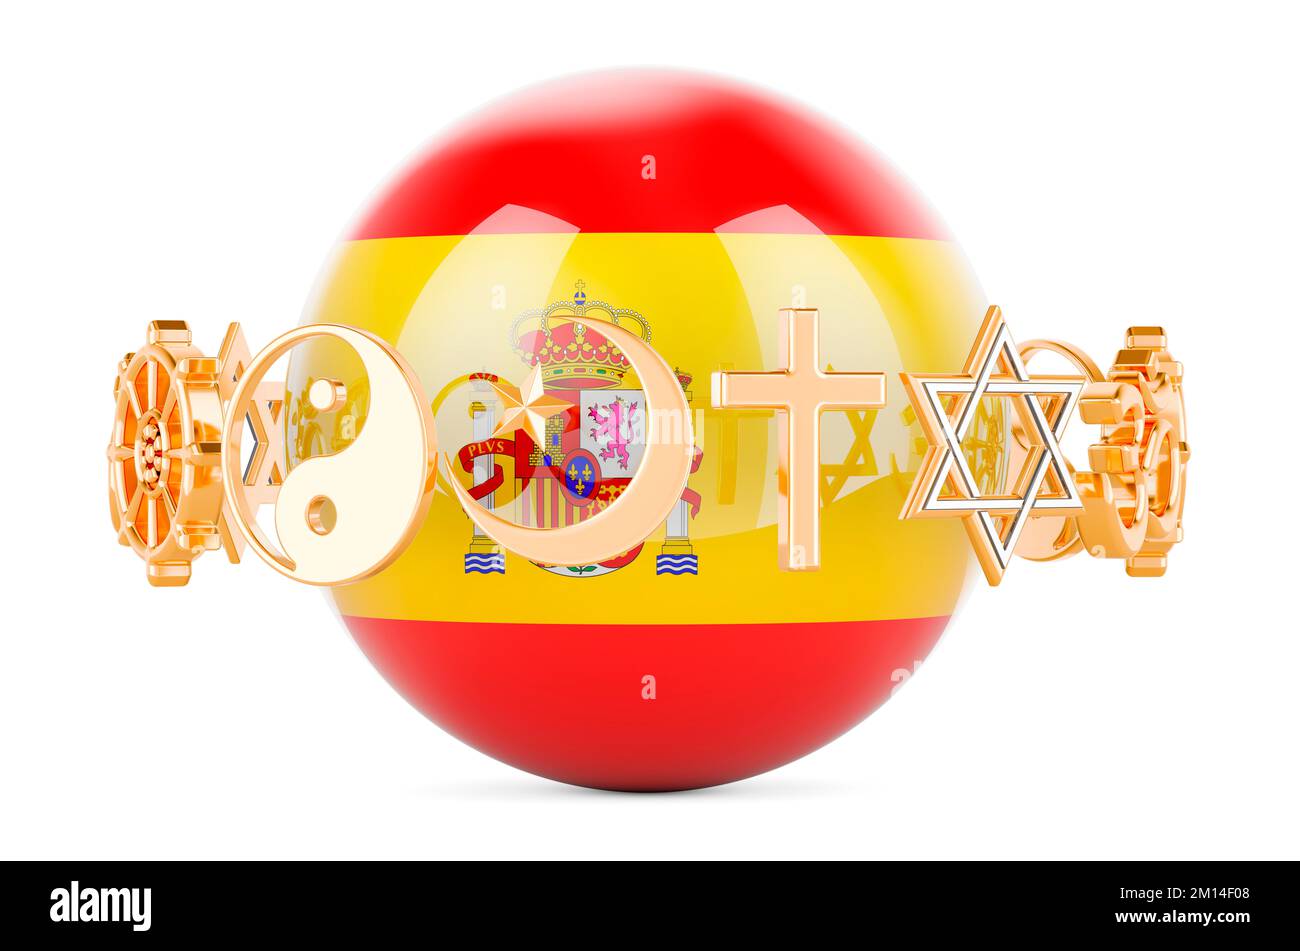 Spanish flag painted on sphere with religions symbols around, 3D rendering isolated on white background Stock Photo